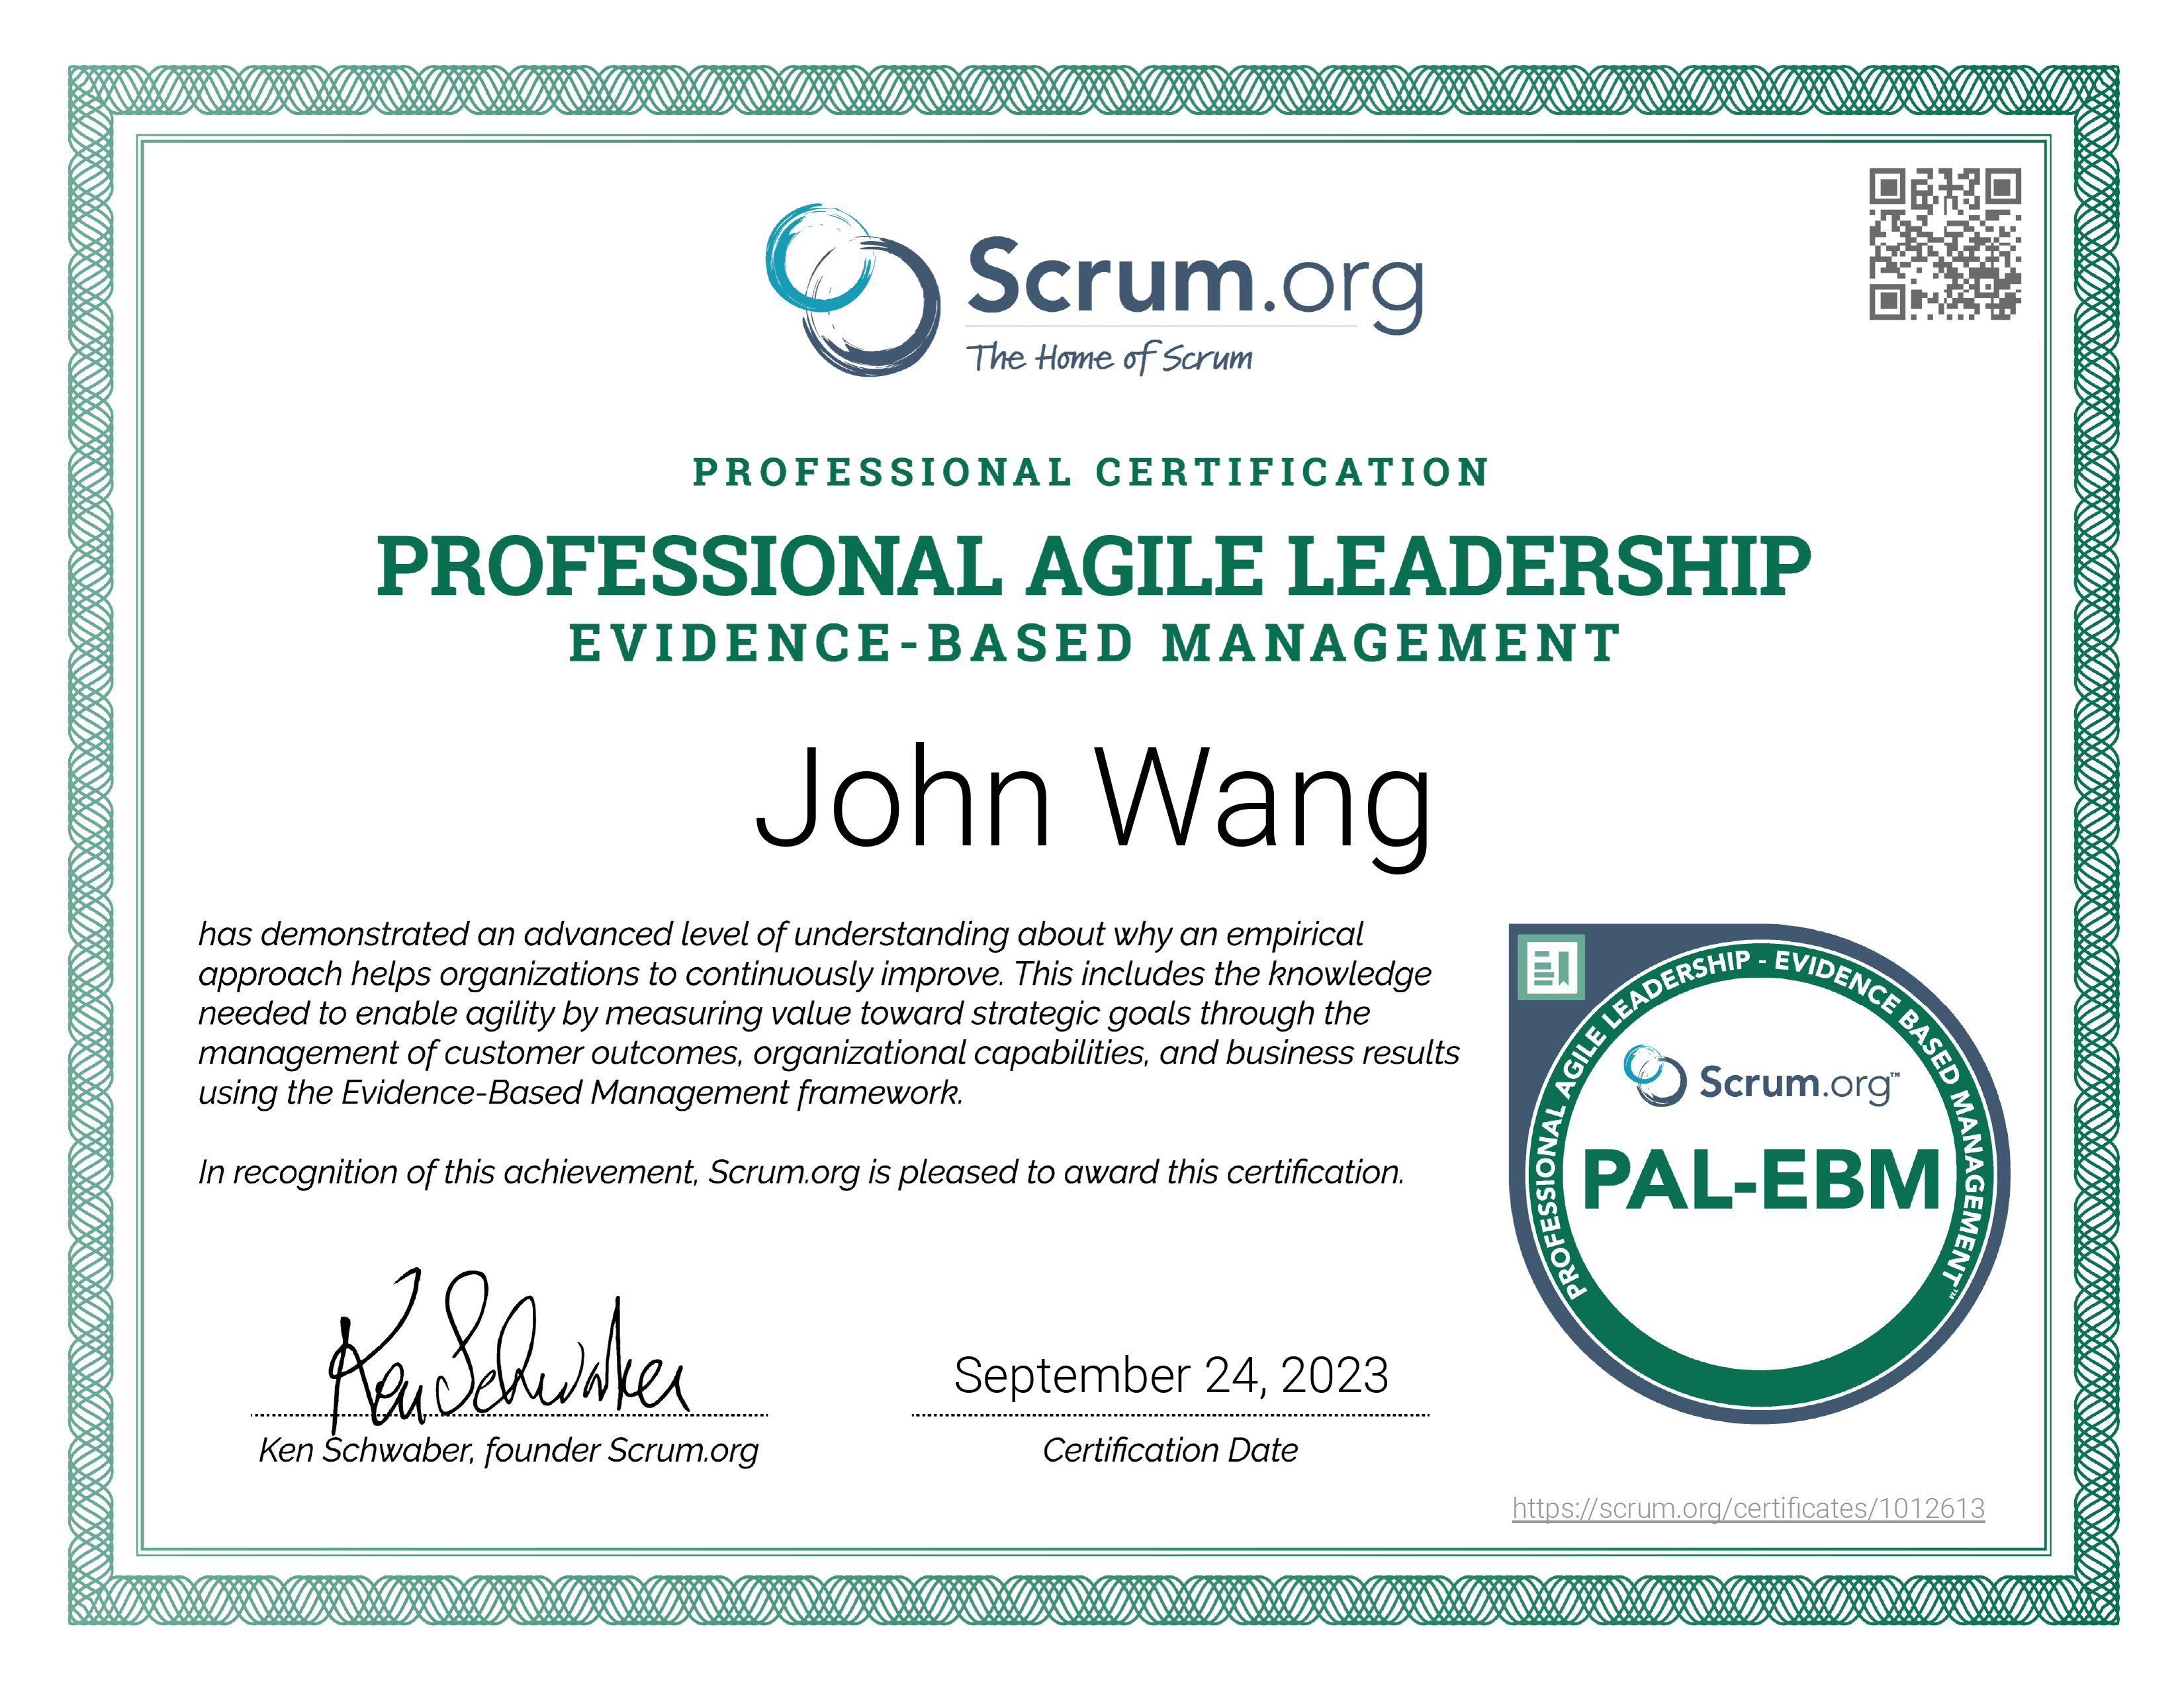 John's Professional Agile Leadership - Evidence-Based Management (PAL-EBM) from Scrum.org